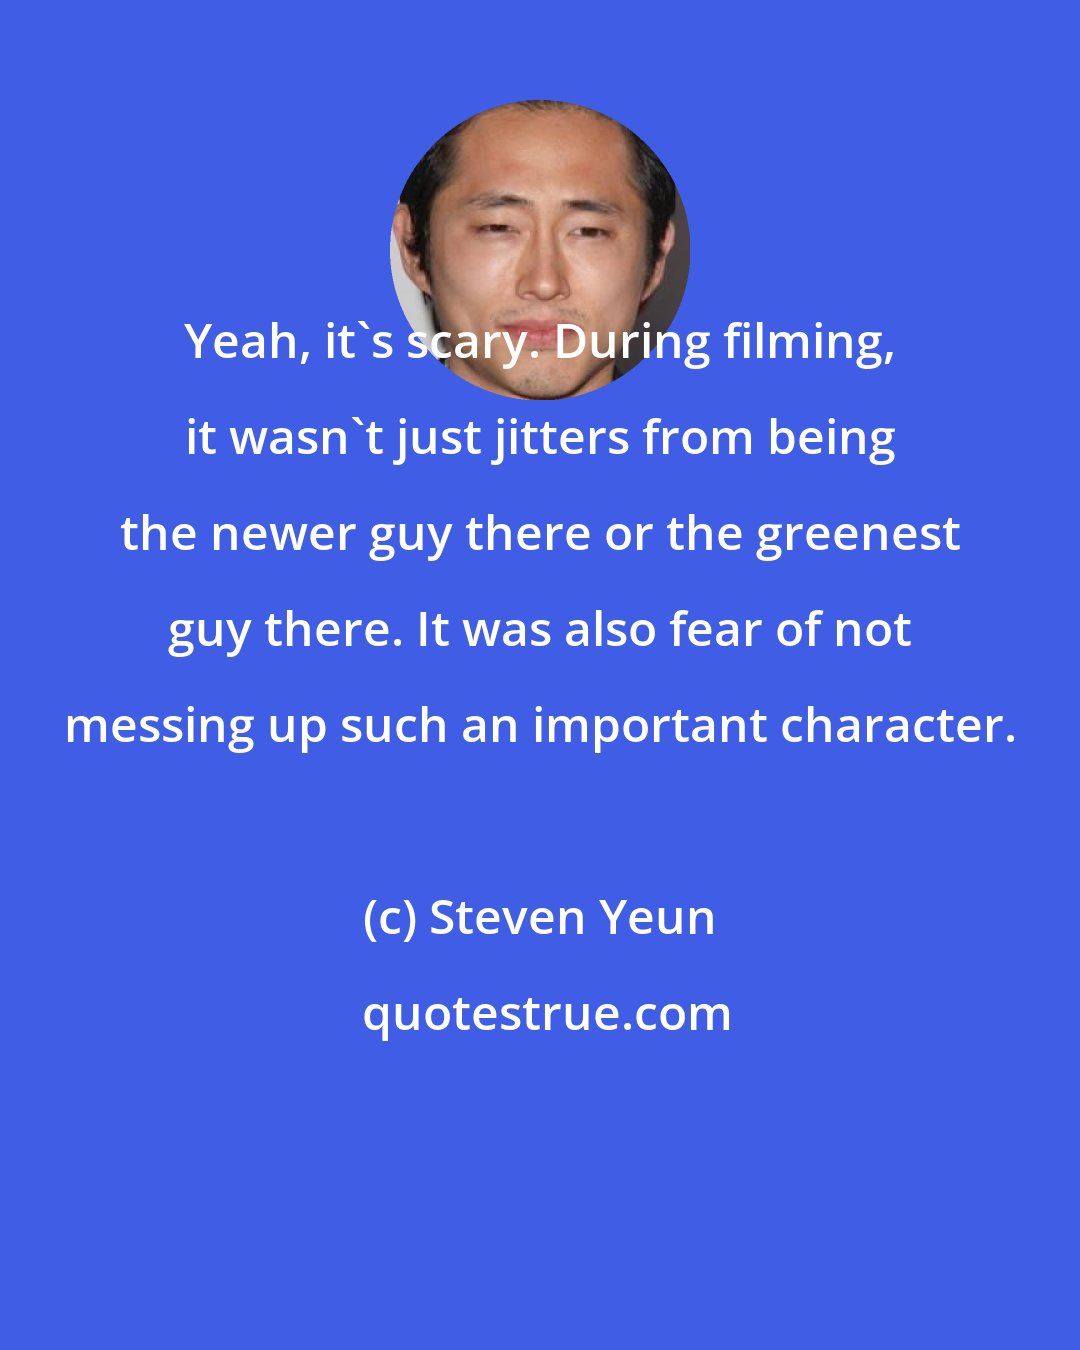 Steven Yeun: Yeah, it's scary. During filming, it wasn't just jitters from being the newer guy there or the greenest guy there. It was also fear of not messing up such an important character.